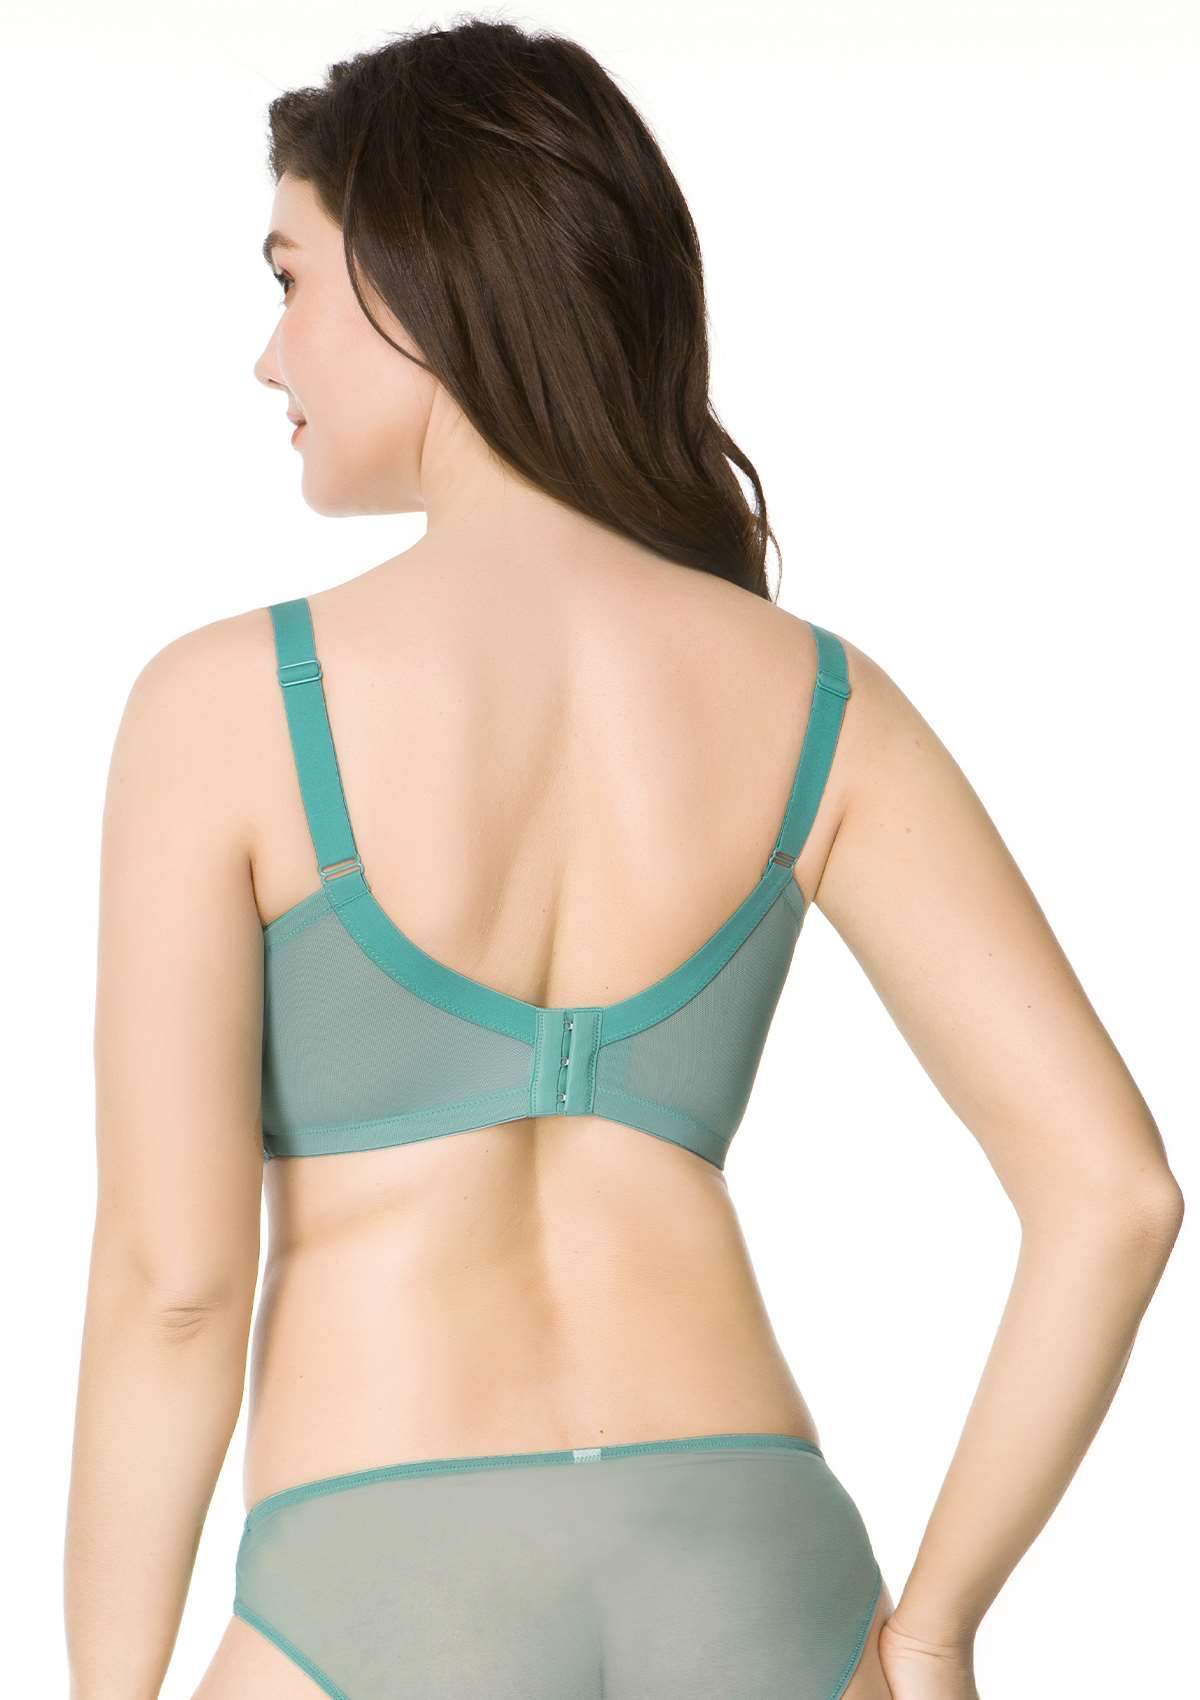 HSIA Peony Lace Unlined Supportive Underwire Bra - Green / 42 / C